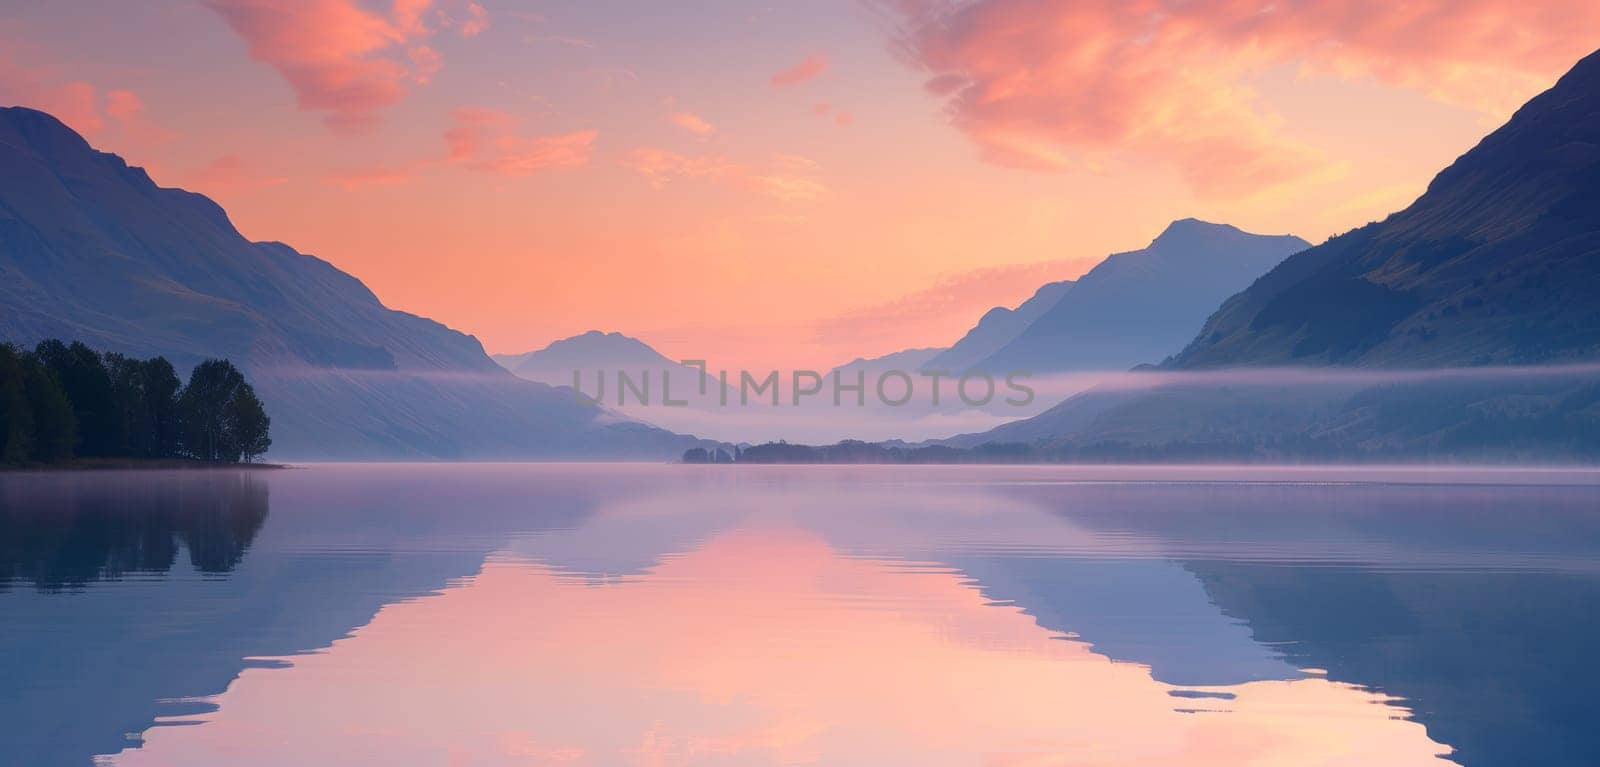 Stunning sunset over a calm lake reflecting vibrant hues of pink and orange mountains. by sfinks